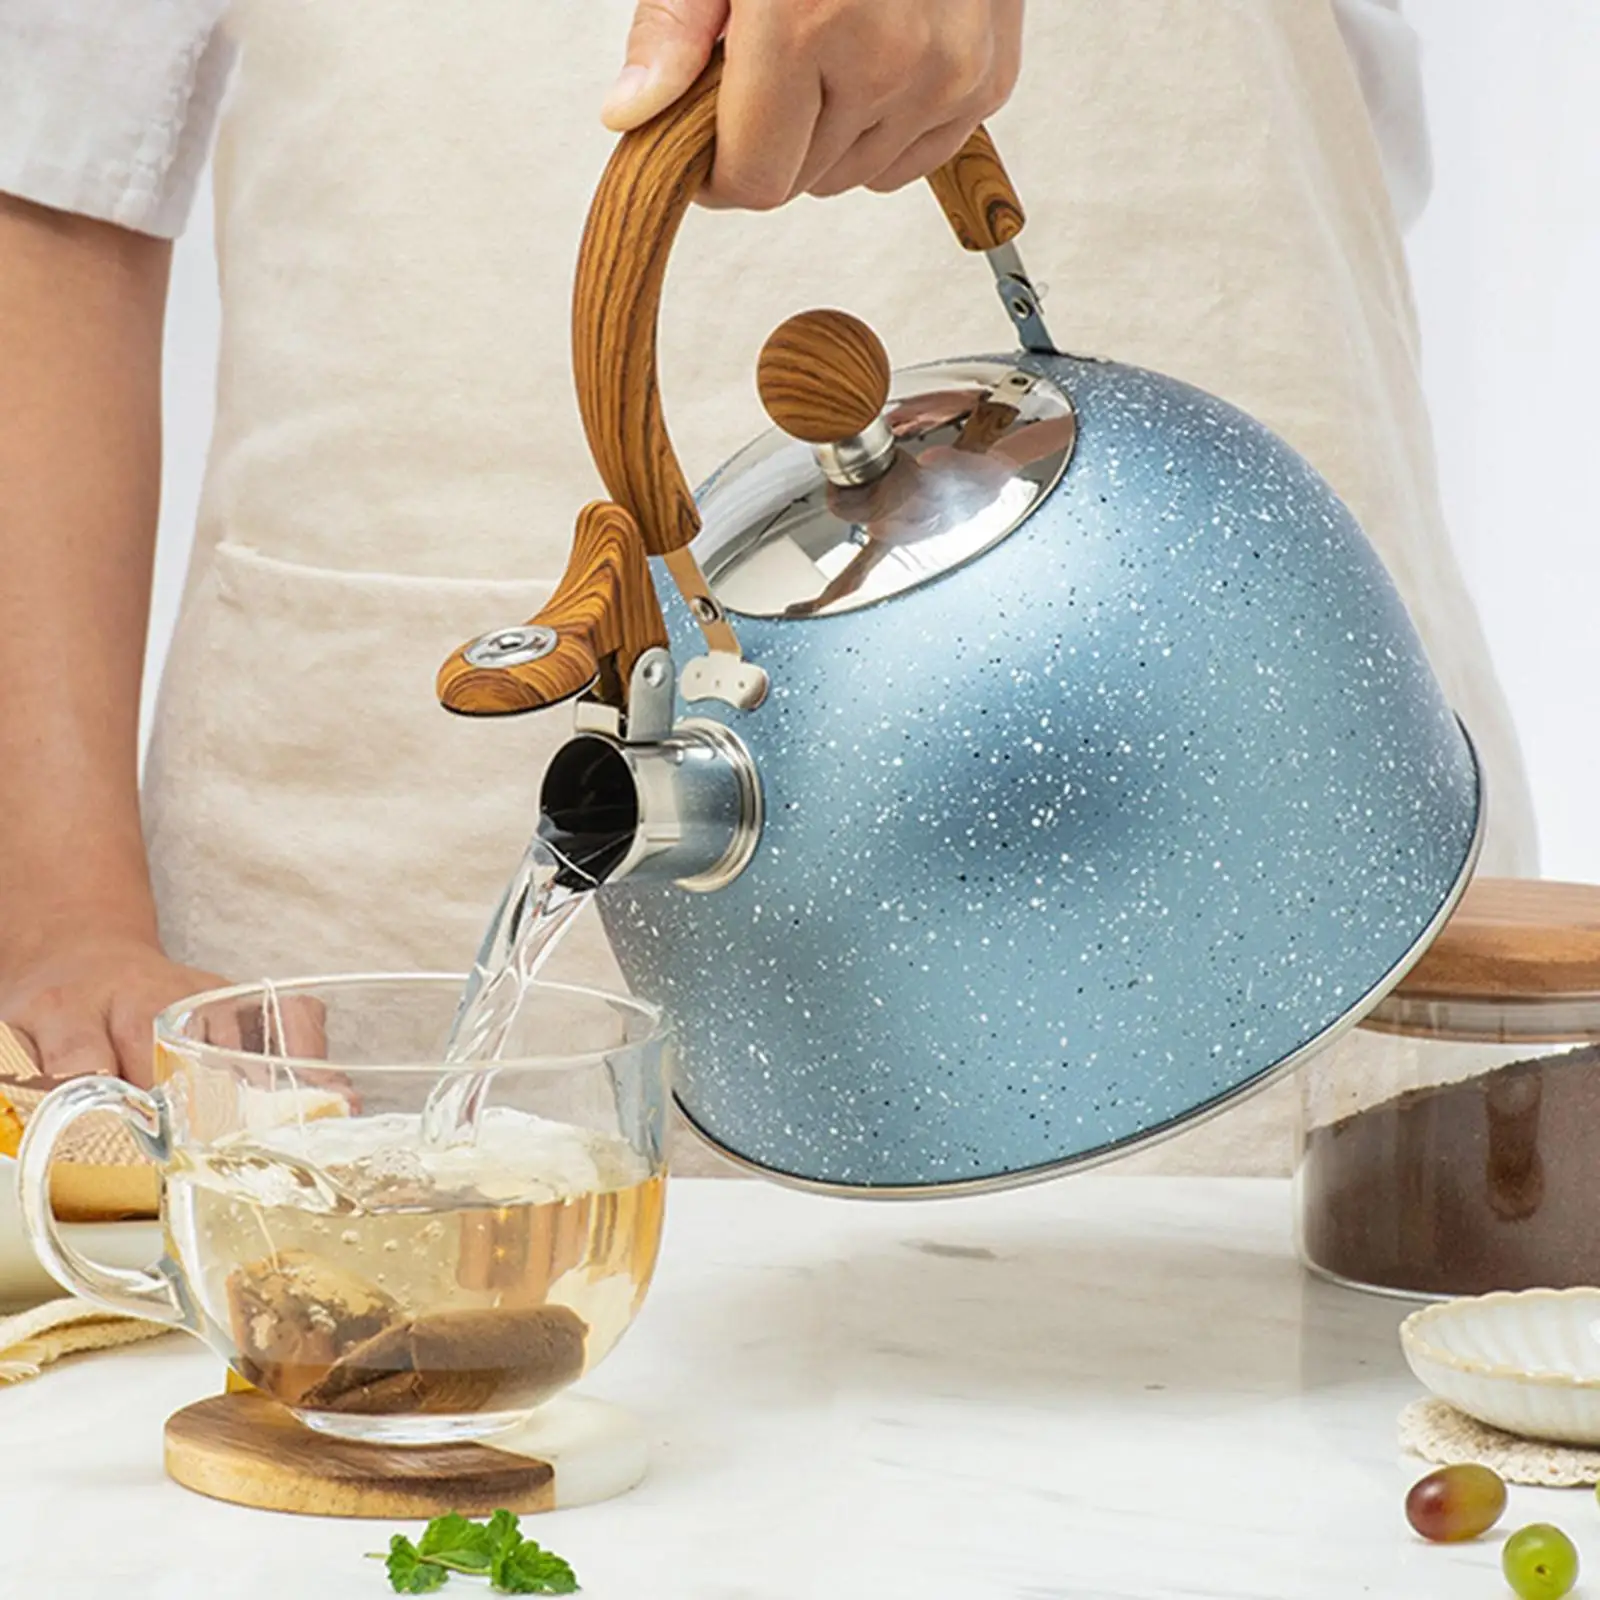 Portable Whistling Kettle Sounding Kettle 2.5L Large Capacity with Wooden Handle Coffee Tea Kettle for Home Kitchen